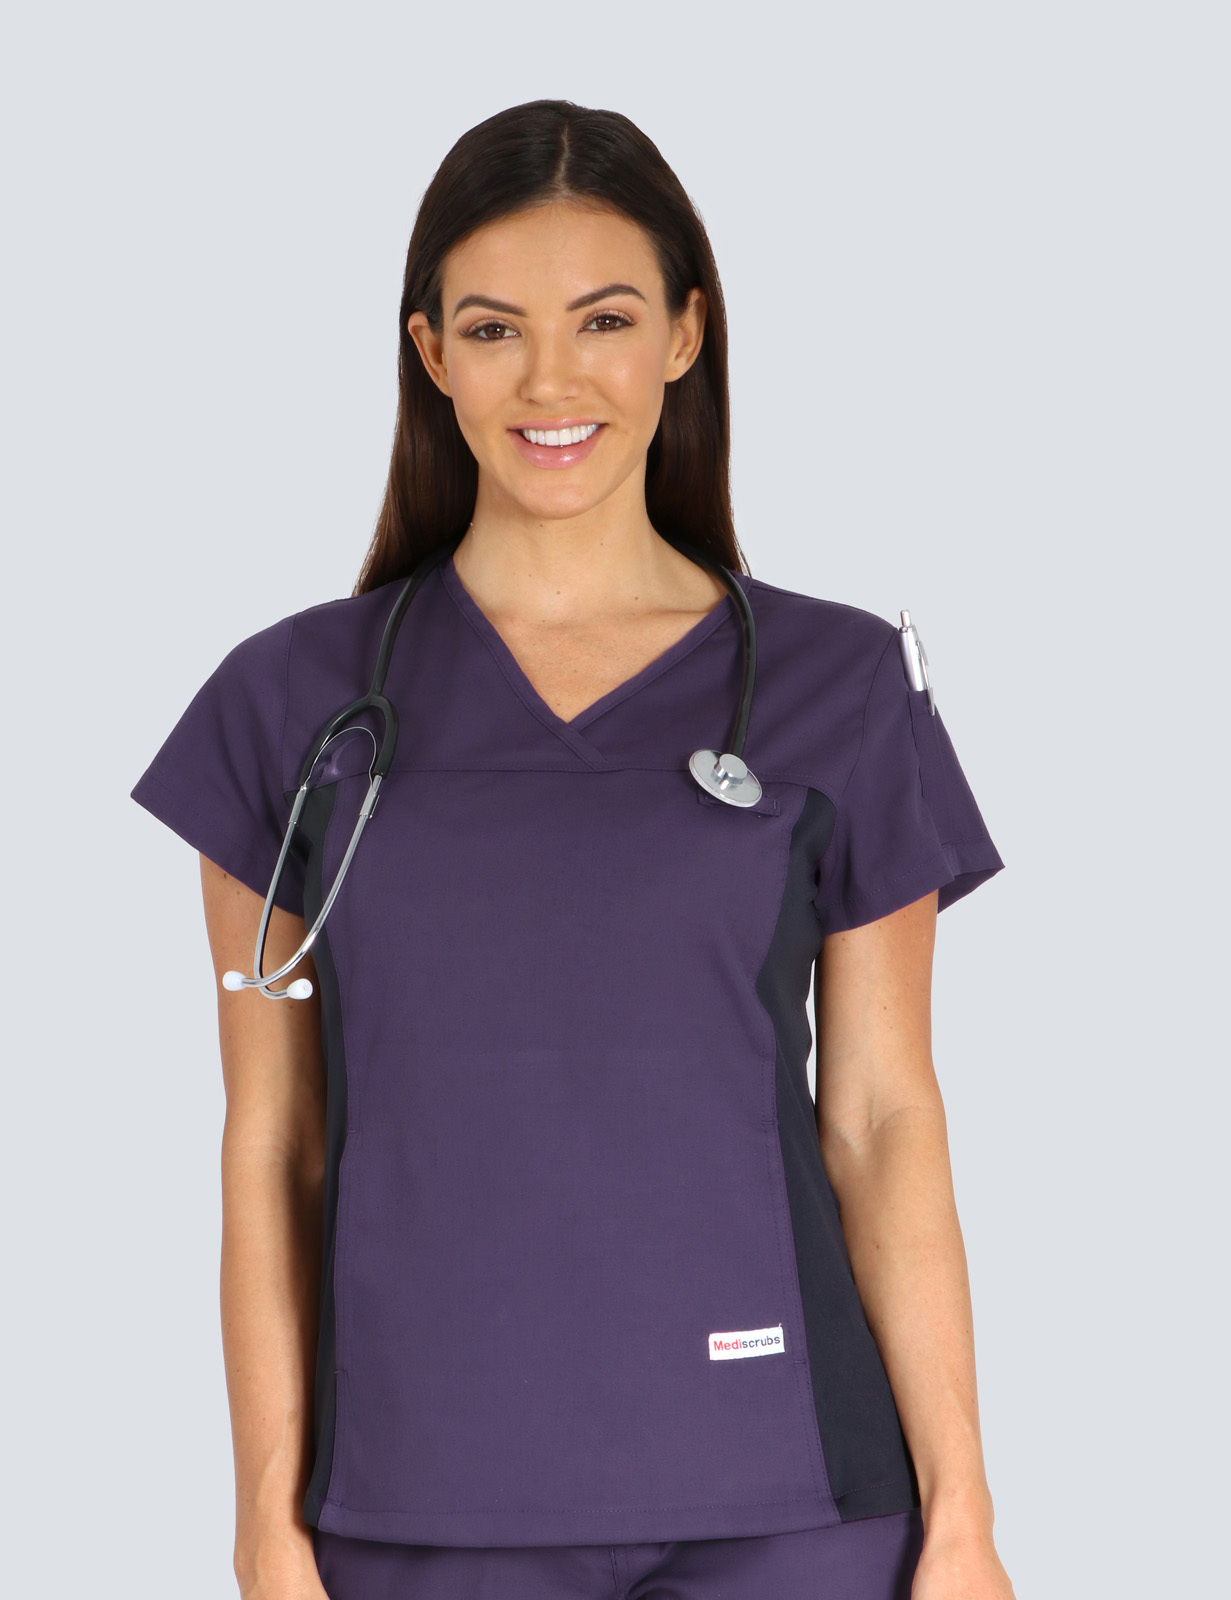 The Park - Centre for Mental Health - Pharmacy Top only Bundle (Women's Fit Top with Spandex Panels incl Logo)